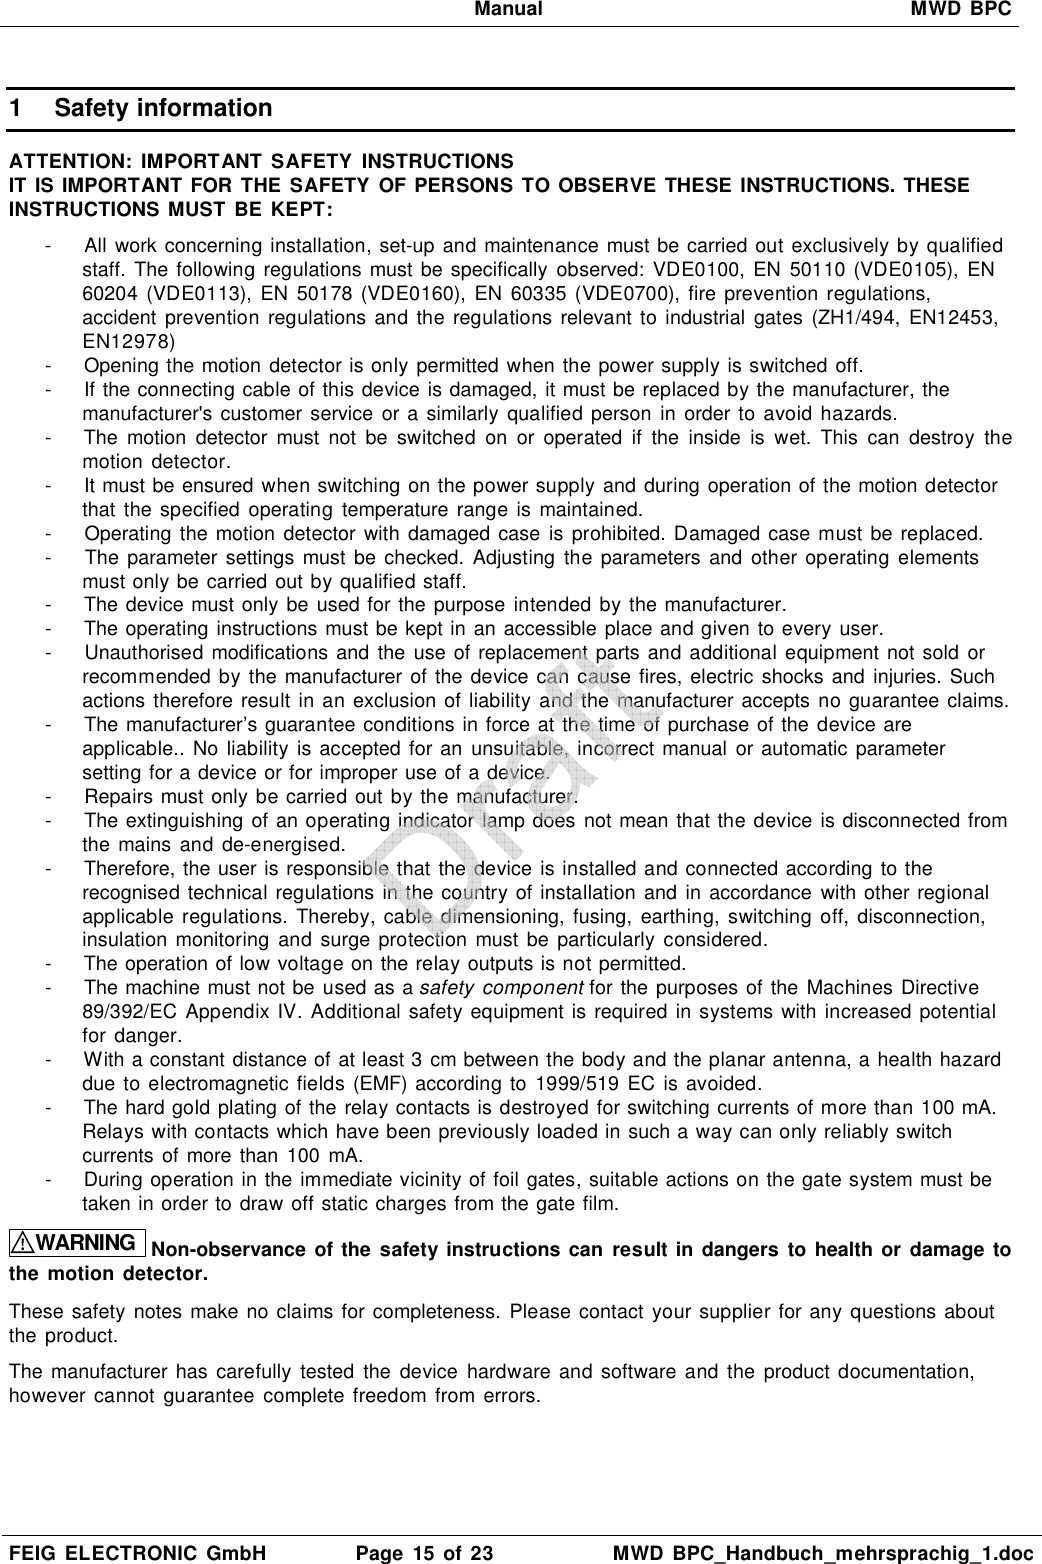   Manual  MWD BPC  FEIG  ELECTRONIC  GmbH  Page  15  of 23  MWD  BPC_Handbuch_mehrsprachig_1.doc  1  Safety information  ATTENTION:  IMPORTANT  SAFETY  INSTRUCTIONS IT  IS IMPORTANT  FOR THE  SAFETY  OF PERSONS  TO OBSERVE  THESE  INSTRUCTIONS. THESE INSTRUCTIONS MUST BE KEPT:  -  All work concerning installation, set-up  and maintenance must be carried out exclusively by qualified staff.  The following  regulations must be specifically  observed:  VDE0100, EN  50110 (VDE0105),  EN 60204  (VDE0113),  EN  50178  (VDE0160),  EN  60335  (VDE0700), fire prevention  regulations, accident  prevention regulations  and the regulations  relevant  to  industrial  gates (ZH1/494,  EN12453, EN12978) -  Opening the motion detector is only permitted when the power supply is switched off. -  If the connecting cable of this device is damaged, it must be replaced by the manufacturer, the manufacturer&apos;s customer service  or a similarly  qualified person  in  order to avoid  hazards. -  The  motion  detector  must  not  be  switched  on  or  operated  if  the  inside  is  wet.  This  can  destroy  the motion  detector. -  It must be ensured when switching on the power supply and during operation of the motion detector that  the  specified  operating temperature range is  maintained. -  Operating the motion  detector  with damaged case is prohibited. Damaged case must  be replaced.  -  The parameter settings  must be checked.  Adjusting  the  parameters  and  other  operating  elements must only be carried out by qualified staff. -  The device must only be  used for the purpose intended by the manufacturer. -  The operating instructions must be kept in an accessible place and given to every user. -  Unauthorised modifications and  the  use of replacement parts and additional equipment not sold  or recommended by the manufacturer of the device can cause fires, electric  shocks and  injuries. Such actions therefore result  in an exclusion of liability and the manufacturer accepts  no guarantee claims. -  The manufacturer’s guarantee conditions in force at the time of purchase of the device are applicable..  No liability  is accepted for an unsuitable,  incorrect manual  or automatic parameter setting for a device or for improper use of a device. -  Repairs must only be carried out by the manufacturer. -  The extinguishing of an operating indicator lamp does not mean that the device is disconnected from the  mains  and  de-energised. -  Therefore, the user is responsible that the device is installed and connected according to the recognised technical regulations in the country of installation and in accordance with other regional applicable  regulations.  Thereby, cable  dimensioning,  fusing, earthing,  switching  off, disconnection, insulation  monitoring and surge protection must be  particularly  considered. -  The operation of low voltage on the relay outputs is not permitted. -  The machine must not be used as a safety component for the purposes of the  Machines Directive 89/392/EC  Appendix IV.  Additional safety equipment is required  in systems with increased potential for danger. -  With a constant distance of at least 3 cm between the body and the planar antenna, a health hazard due to electromagnetic fields (EMF) according to 1999/519  EC  is avoided. -  The hard gold plating of the relay contacts is destroyed for switching currents of more than 100 mA. Relays with contacts which have been previously loaded in such a way can only reliably switch currents of more than  100  mA. -  During operation in the immediate vicinity of foil gates, suitable actions on the gate system must be taken in order to draw off static charges from the gate film.  WARNING Non-observance of the safety instructions can result in dangers to health or  damage to the motion  detector.  These safety notes make no claims for completeness.  Please contact  your supplier for any questions about the product.  The manufacturer has  carefully  tested the device  hardware  and software  and  the  product documentation, however  cannot guarantee  complete freedom from errors.   